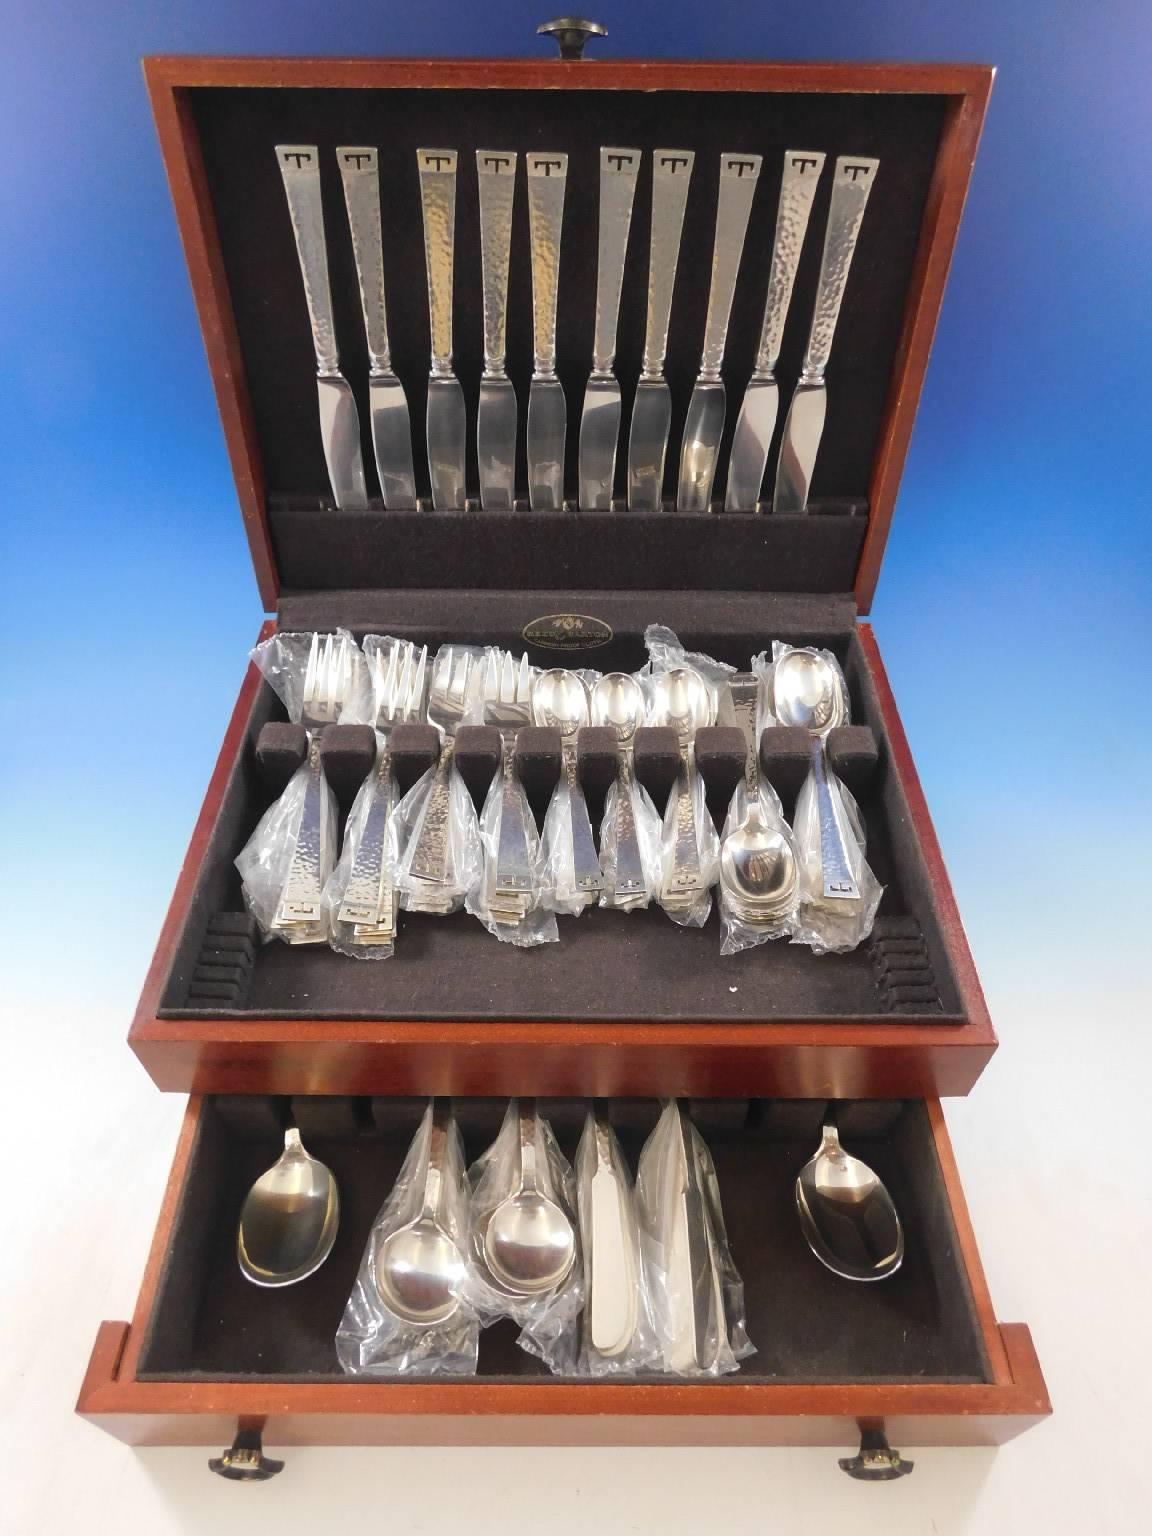 Masterfully crafted dinner size Chinese key by Allan Adler sterling silver flatware set with hand-hammered finish - 72 pieces. This set includes:

Ten dinner size knives with innovative solid handles, 9 5/8